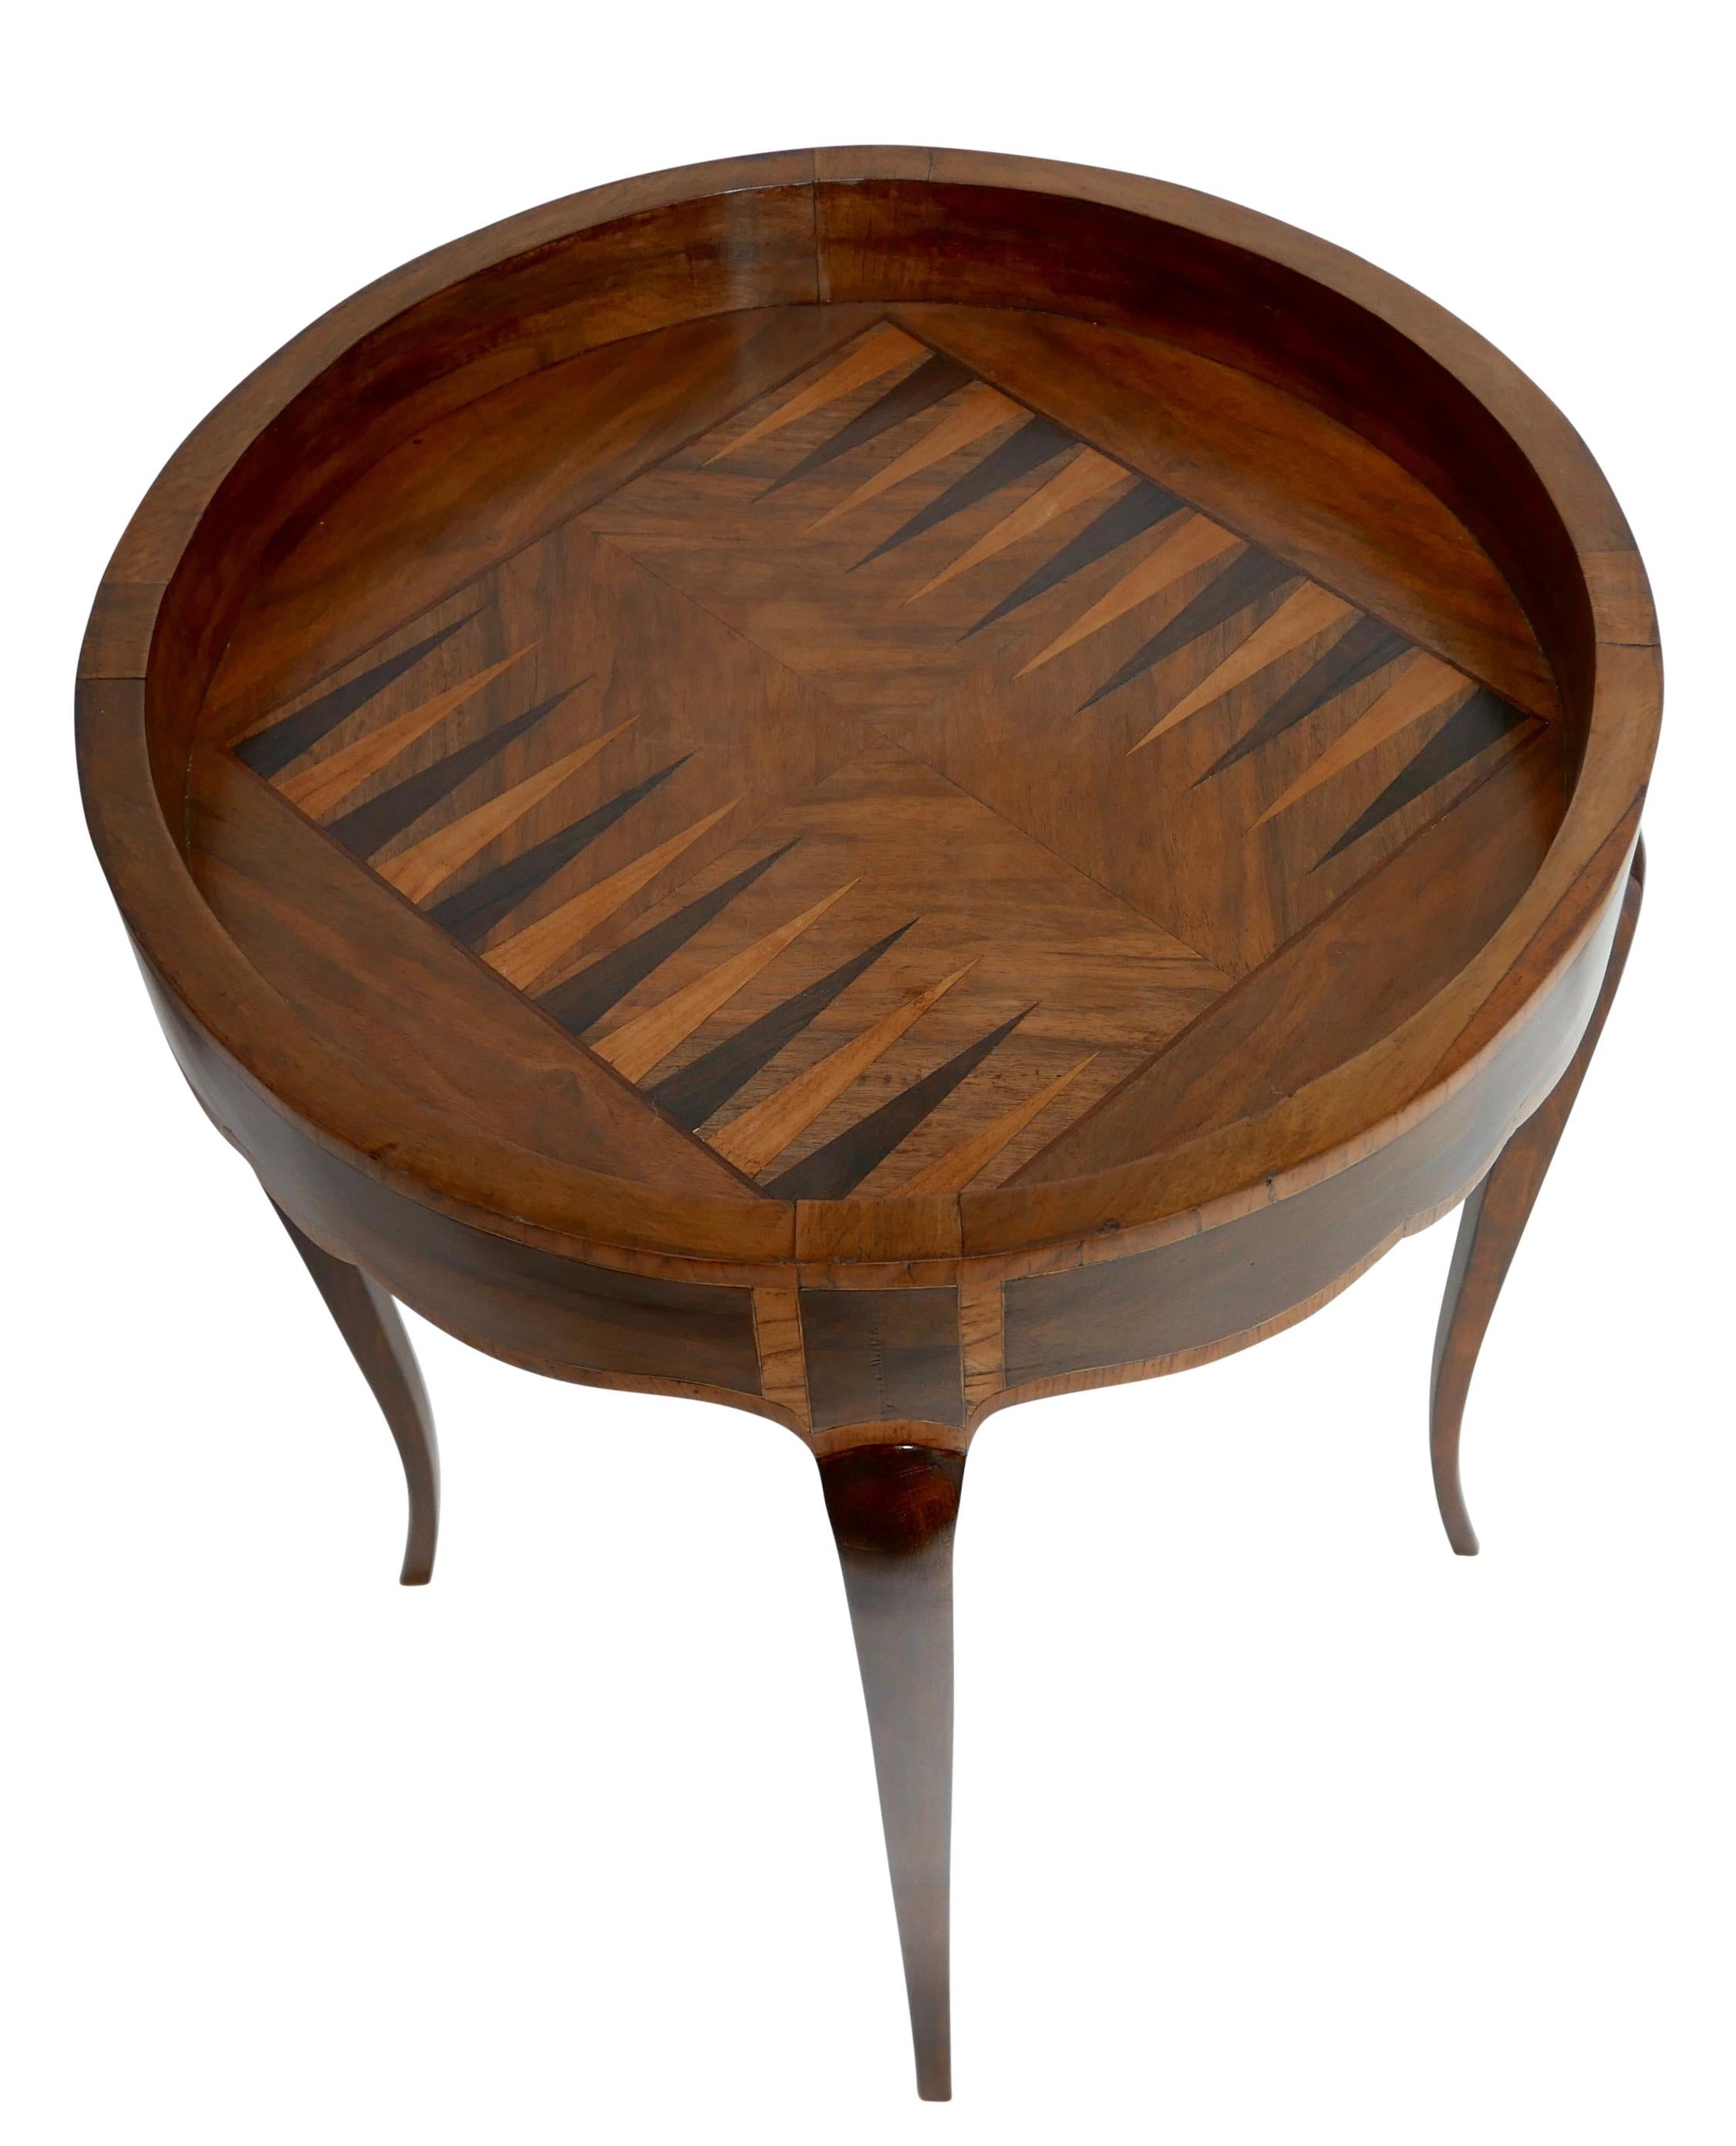 Walnut Circular Tric Trac Game Table with Fruitwood Inlay, Mid-19th Century 4